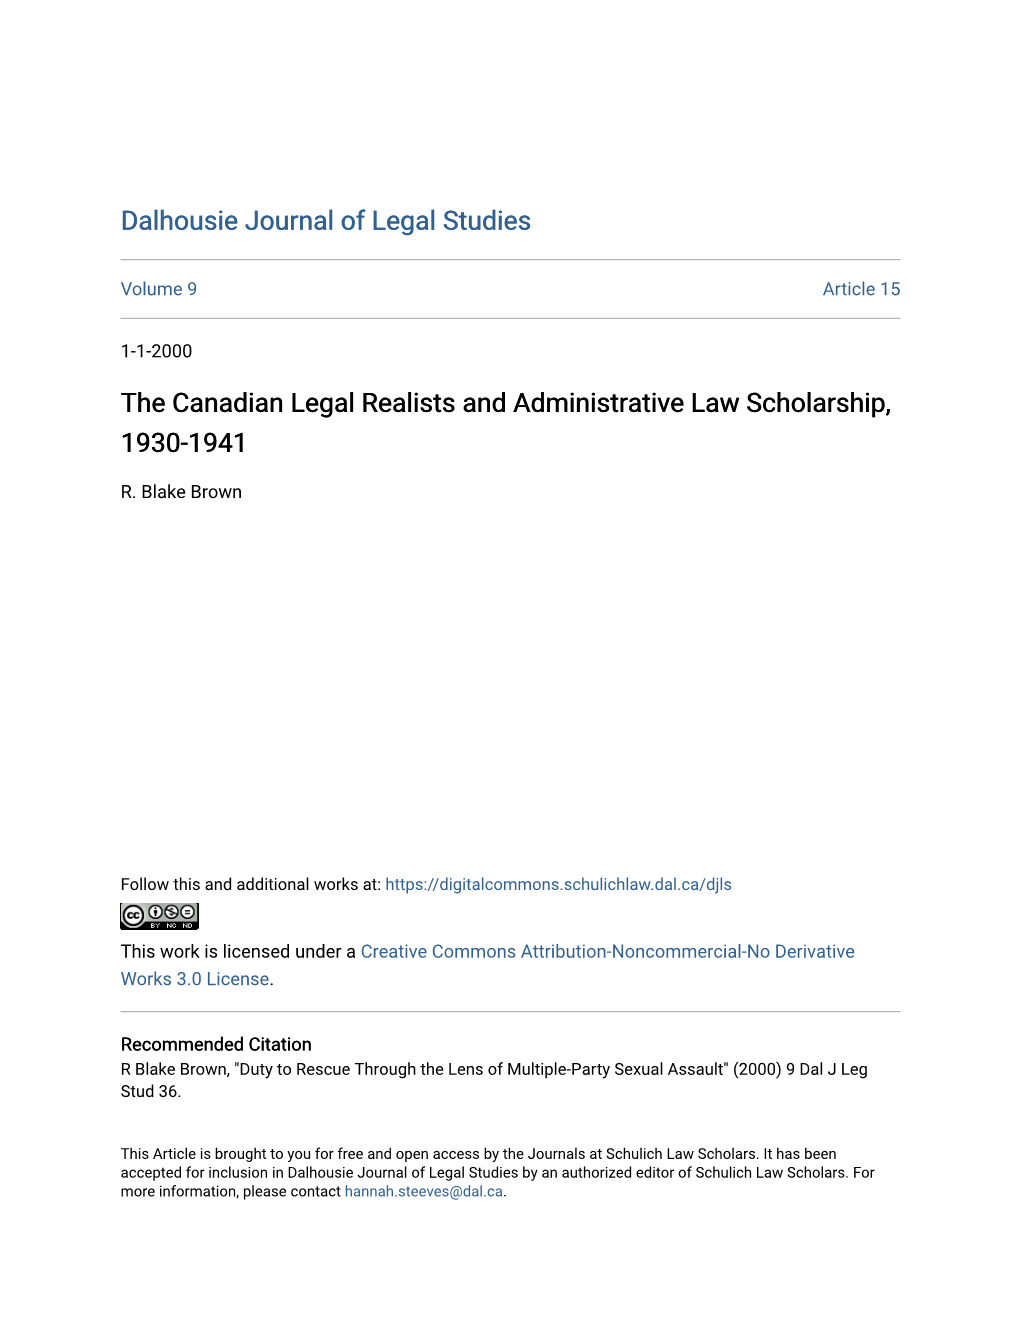 The Canadian Legal Realists and Administrative Law Scholarship, 1930-1941